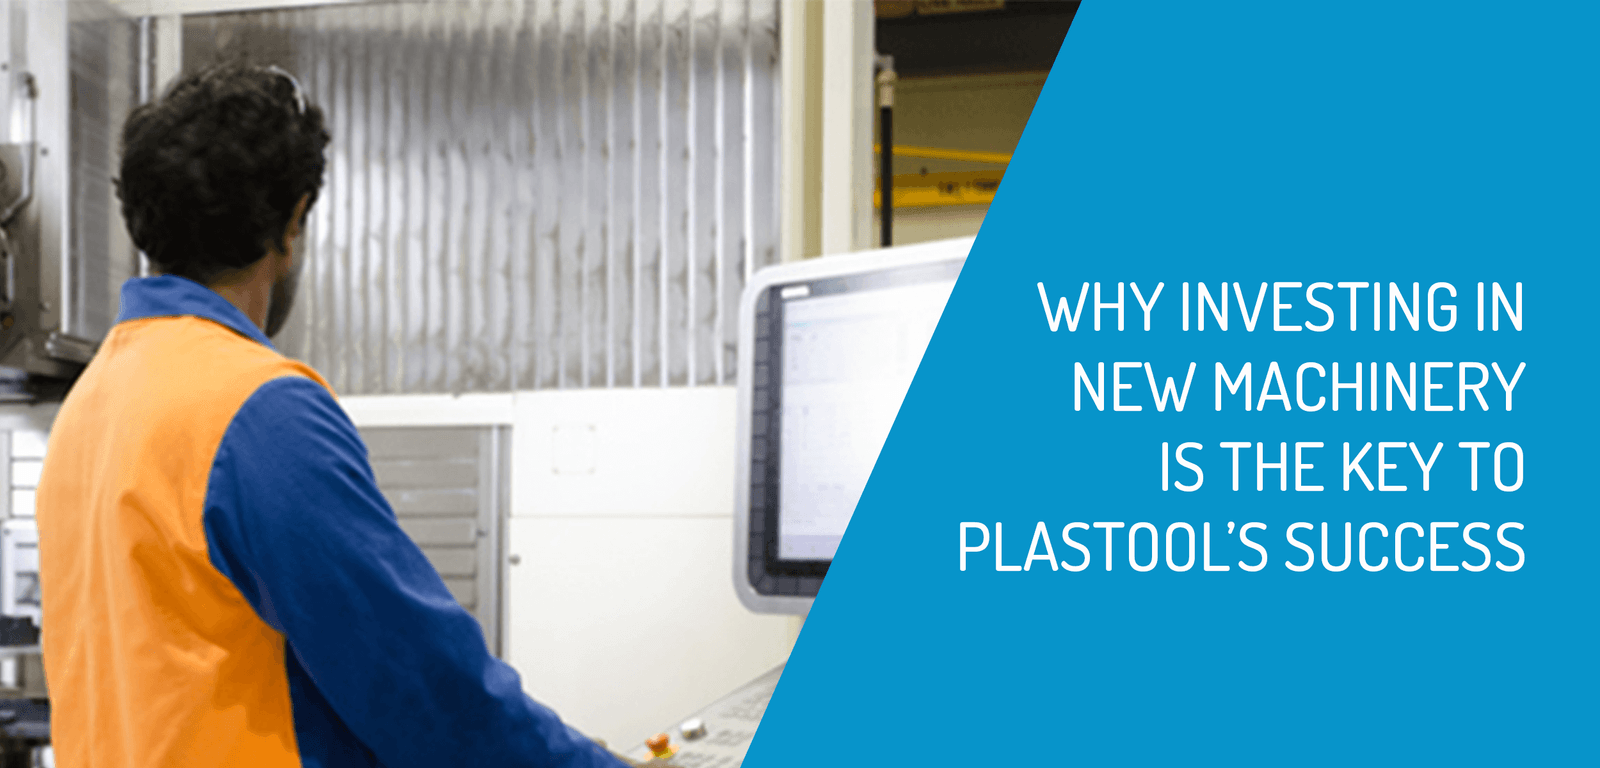 Why Investing in New Machinery Is the Key to Plastool’s Success